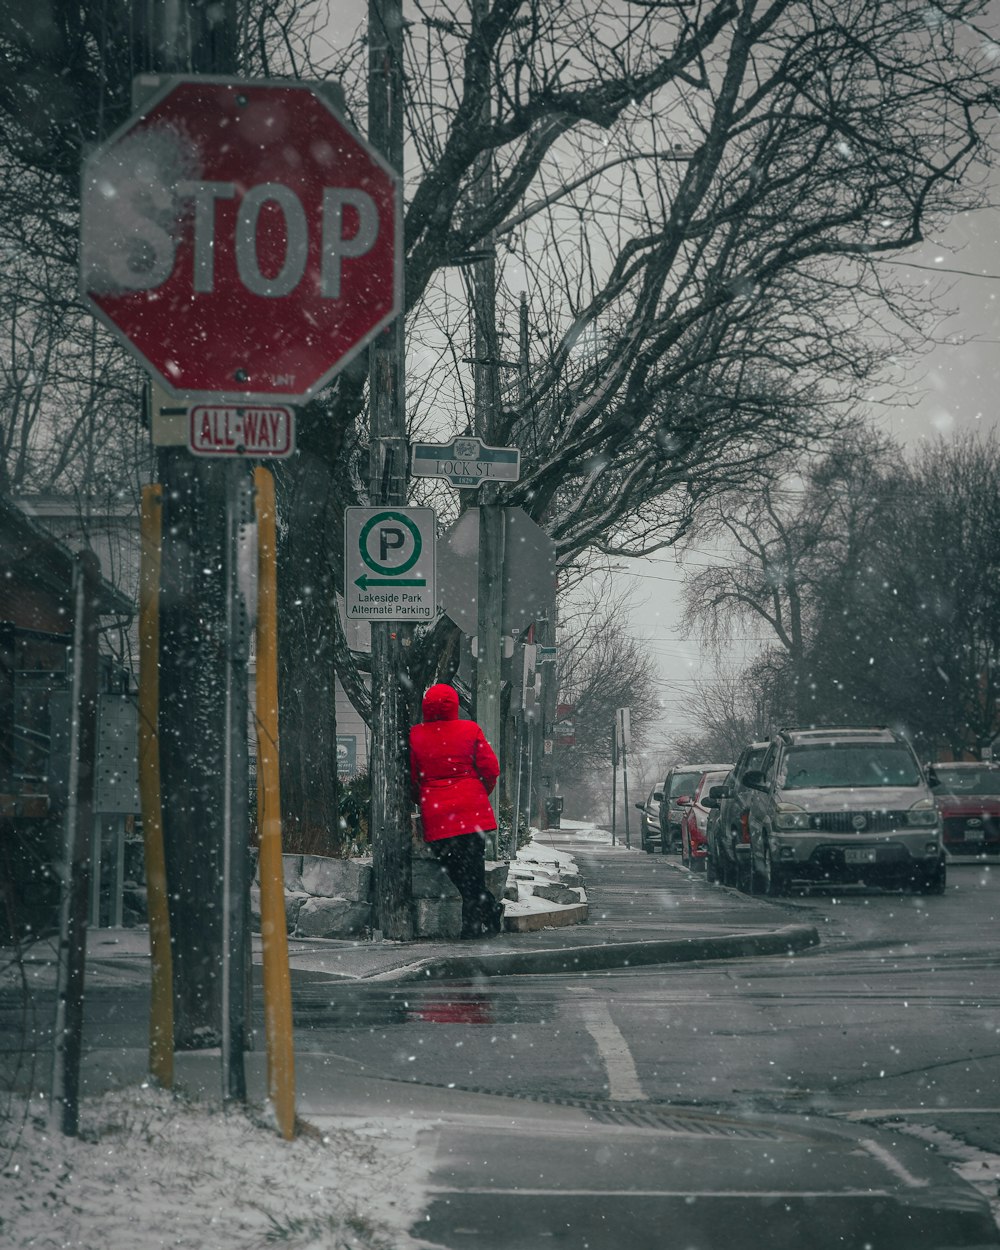 a person in a red jacket standing next to a stop sign